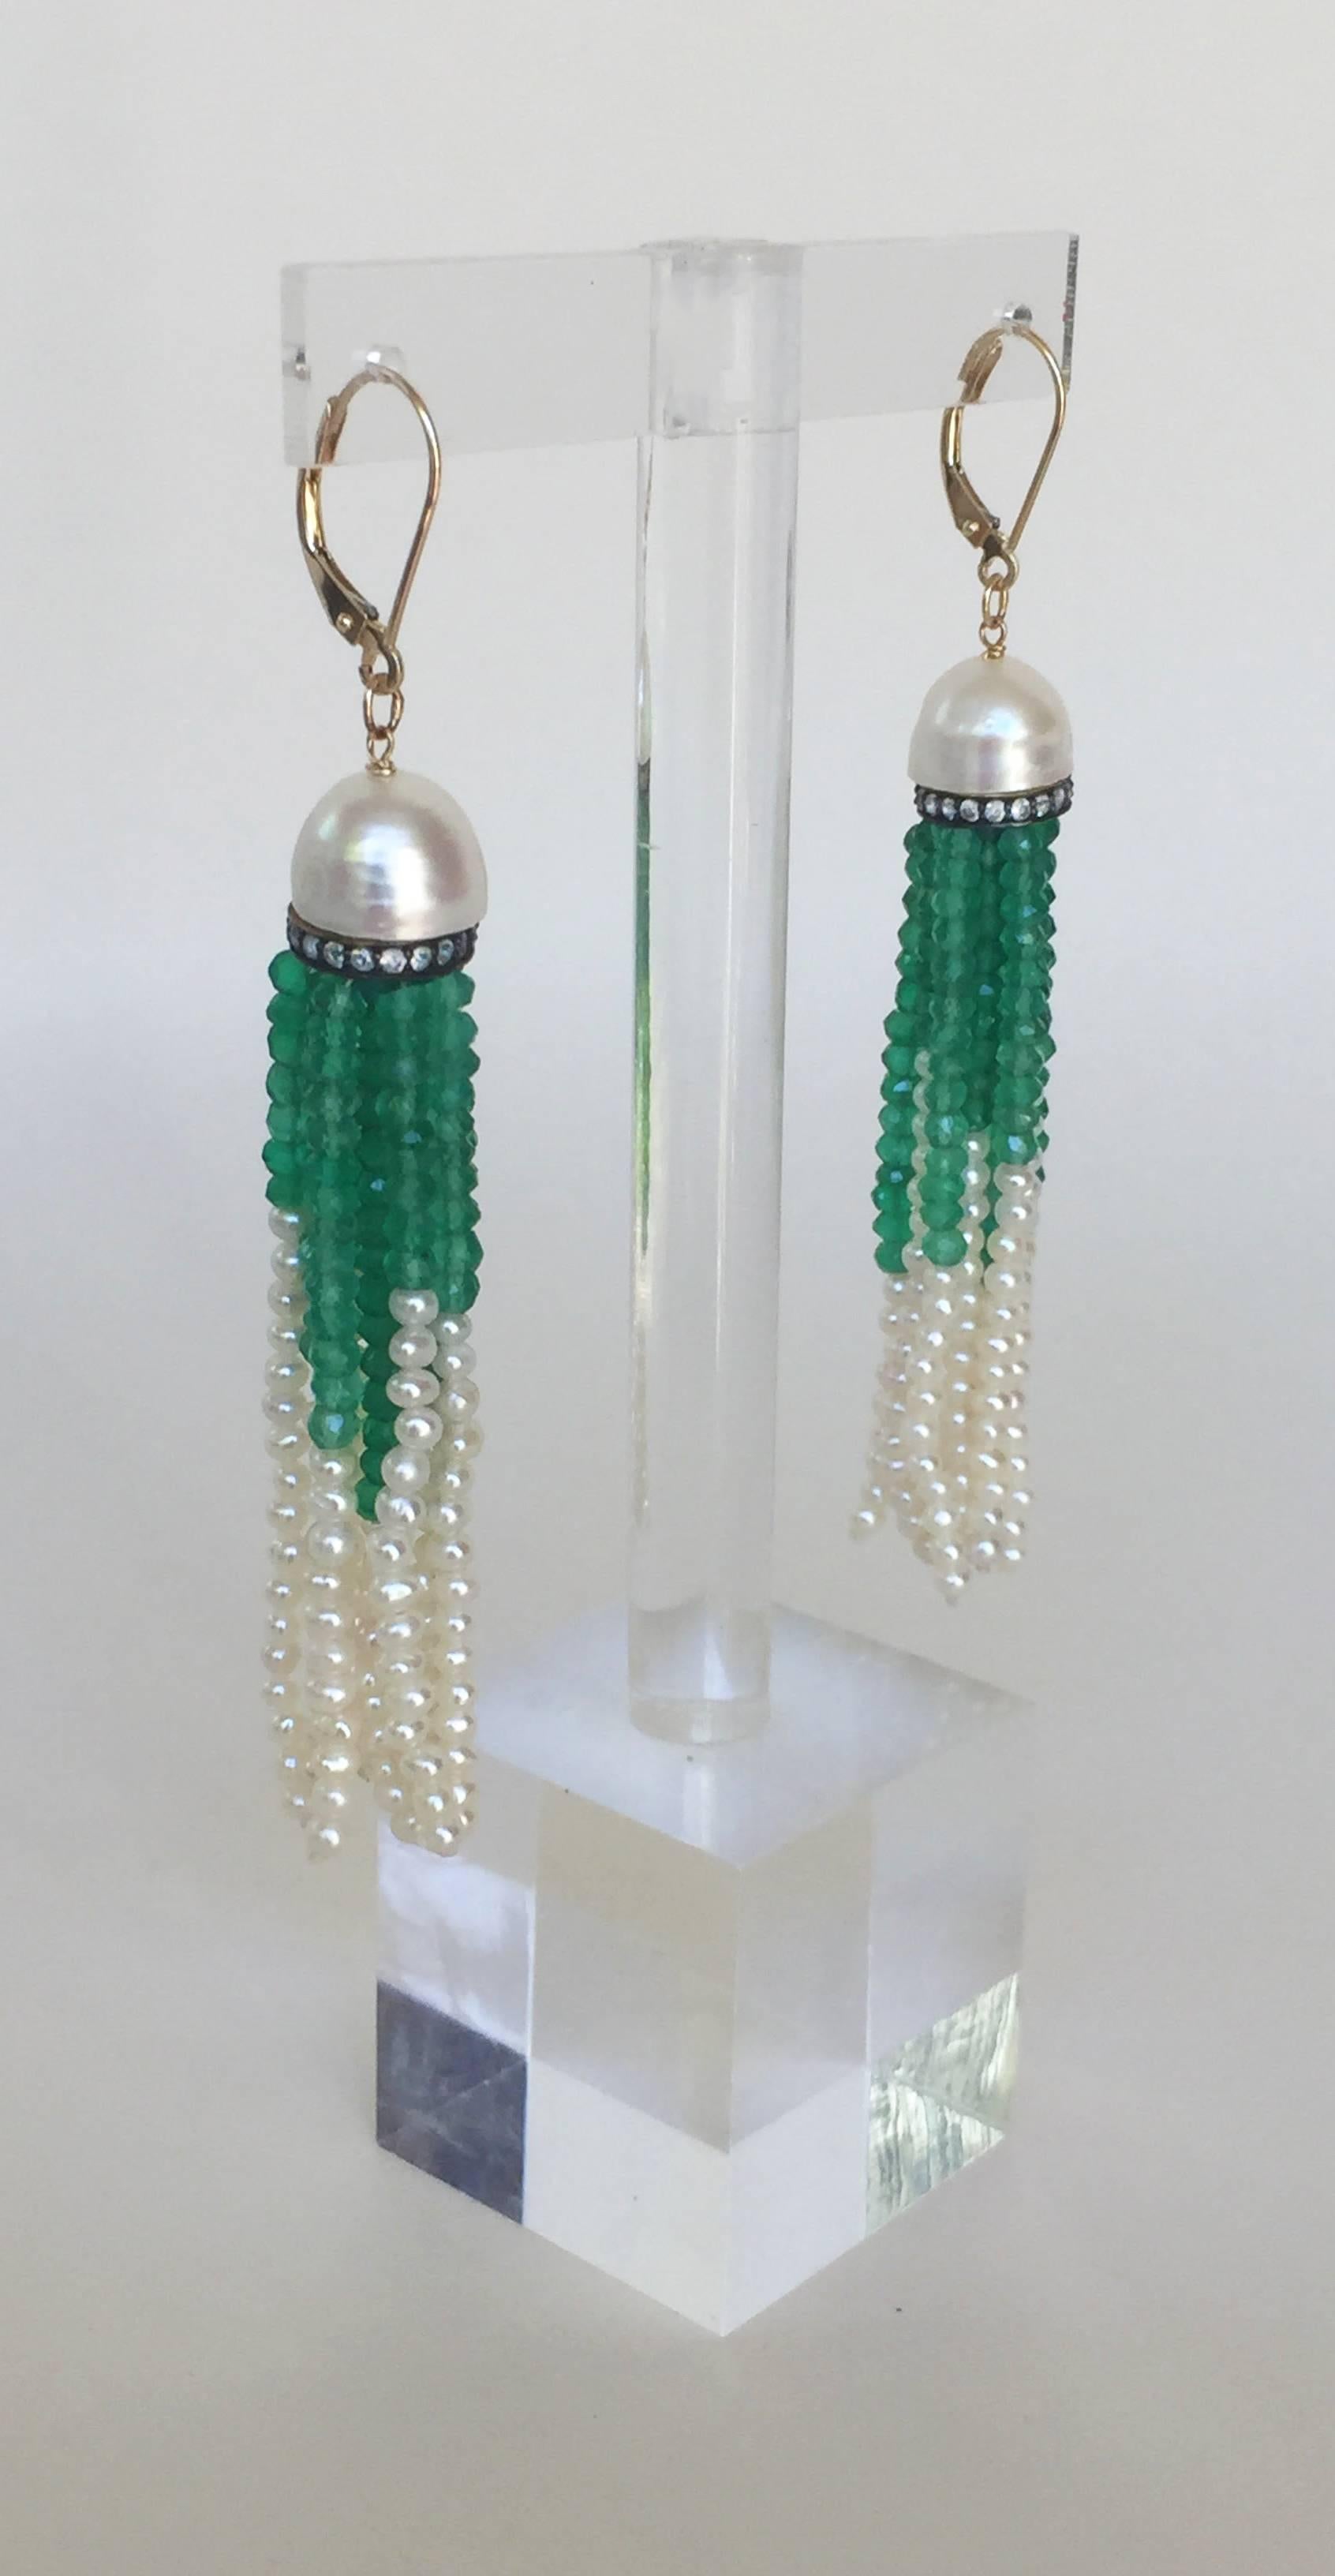 Striking One of a Kind pair of Earrings by Marina J. This pair of earrings feature two half cut Baroque Pearls displaying a great iridescent sheen, sitting atop Diamond encrusted roundels- from which vibrant and vivid faceted Green Onyx and Seed